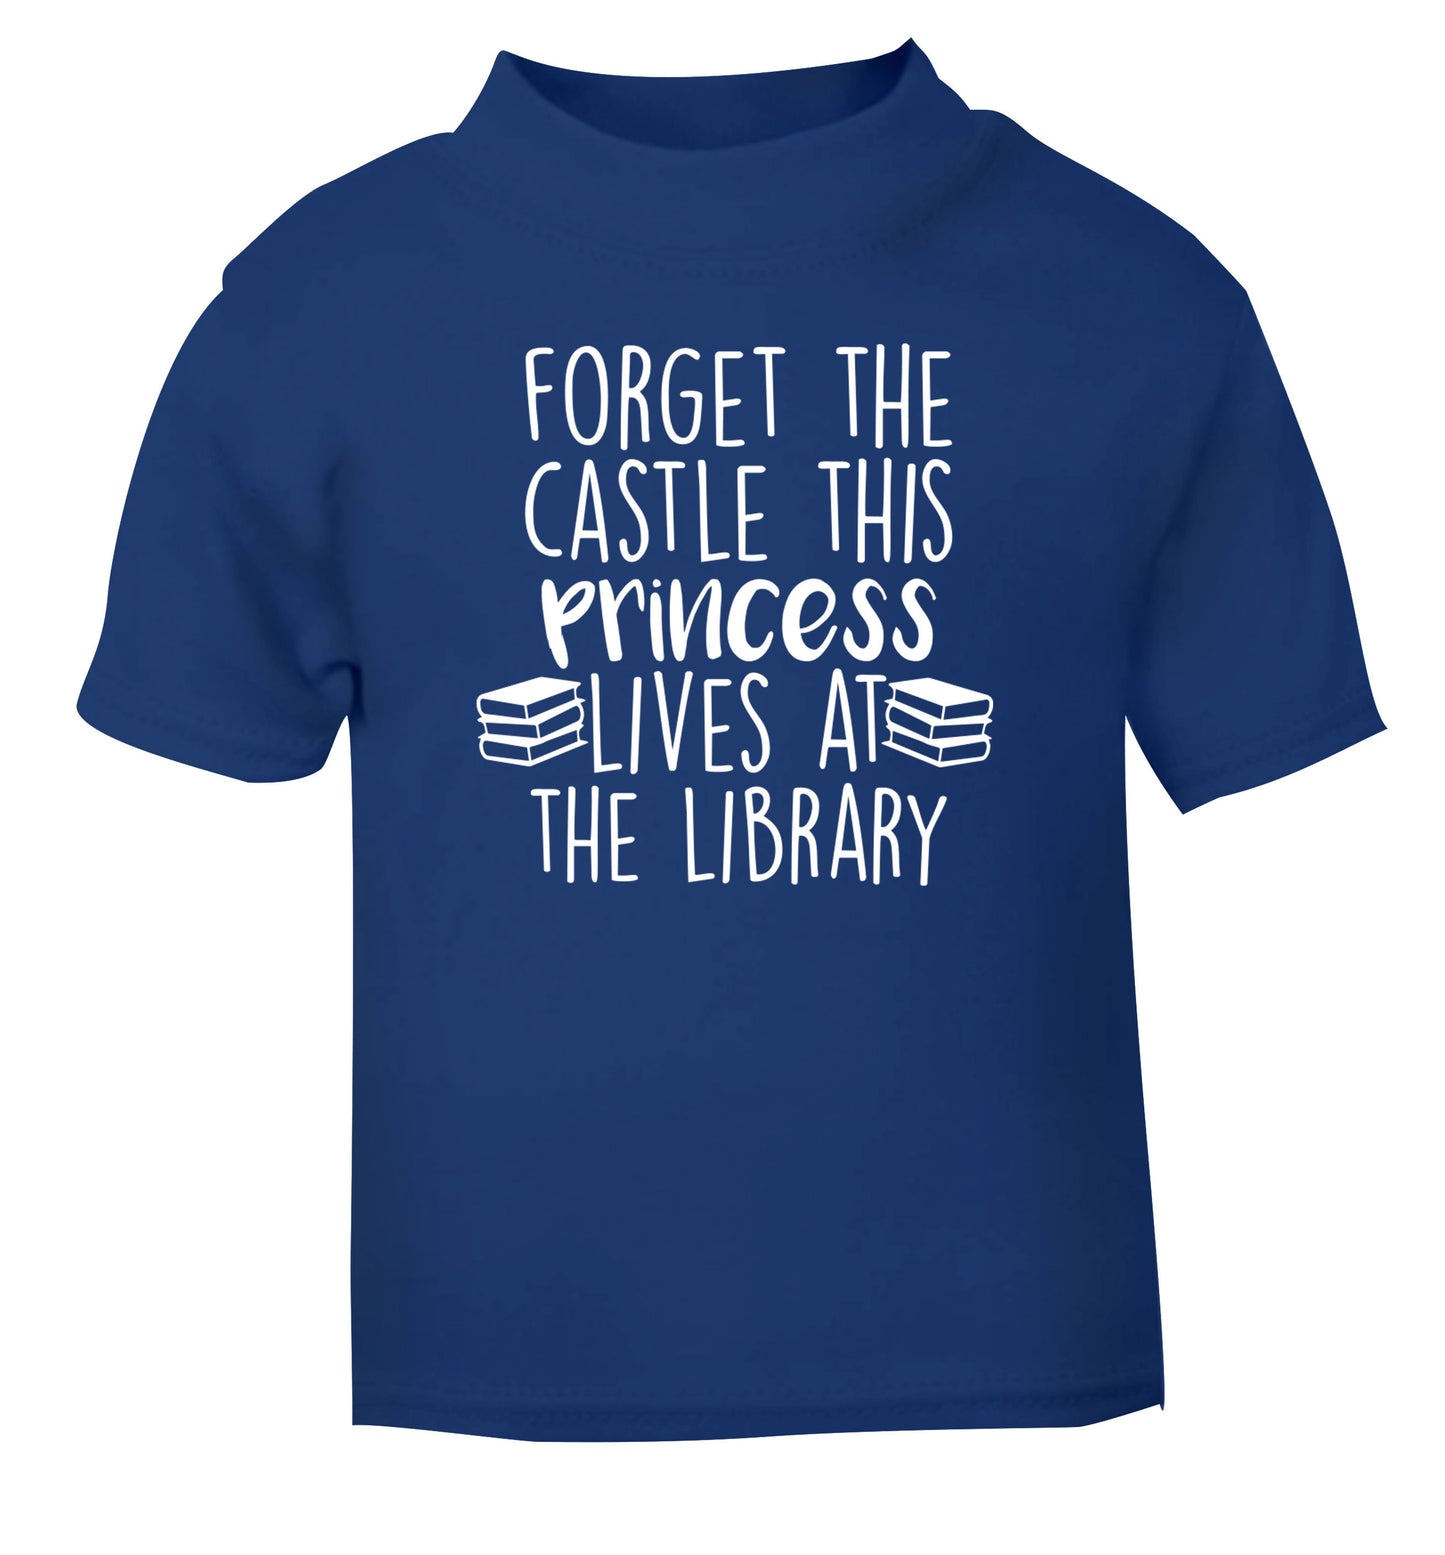 Forget the castle this princess lives at the library blue Baby Toddler Tshirt 2 Years